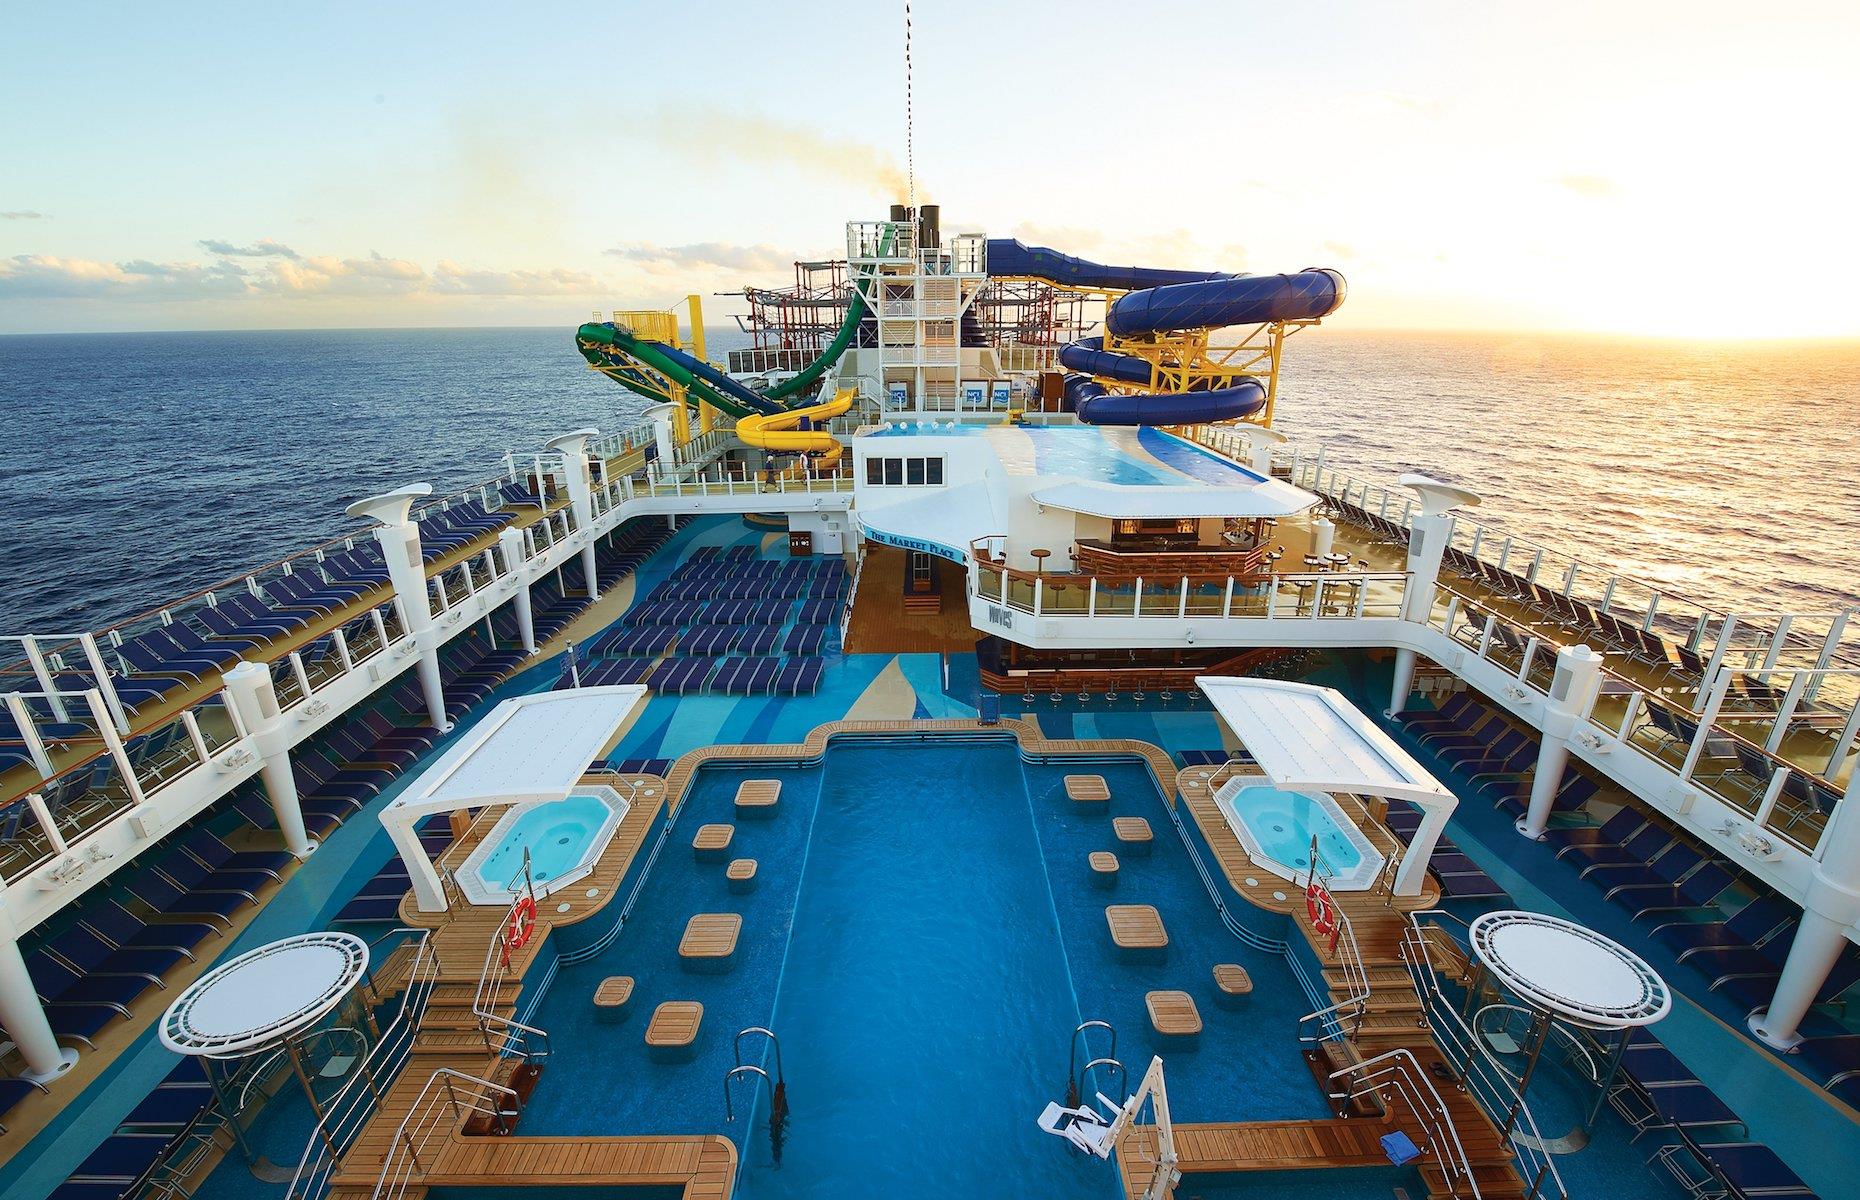 <p>For a fuss-free and fun vacation, sail away to the eastern Caribbean on board Norwegian Cruise Line’s newest ship, the Norwegian Escape. You’ll visit some amazing places including St. Thomas, Tortola and Nassau and have incredible onboard adventures along the way. There's an aqua park, a ropes course, 10-pin bowling and rock climbing to keep you entertained. And with a new kids' club for teeny ones (three months to three-year-olds) there's even more chance for parents to relax.</p>